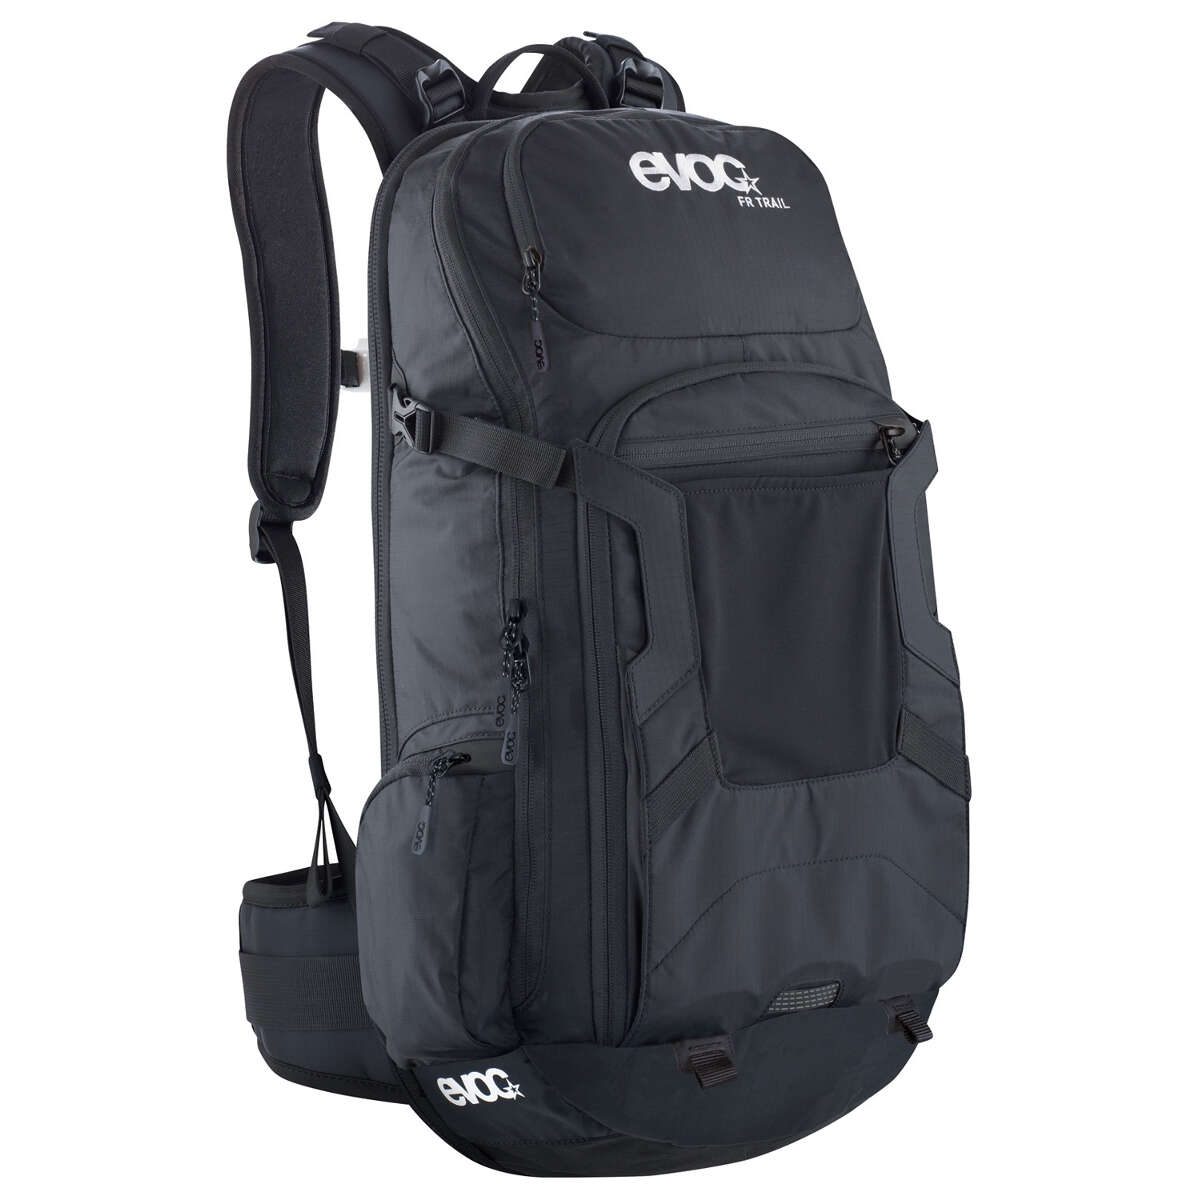 Evoc Protector Backpack with Hydration System Compartment FR Trail Black, 20 Liter